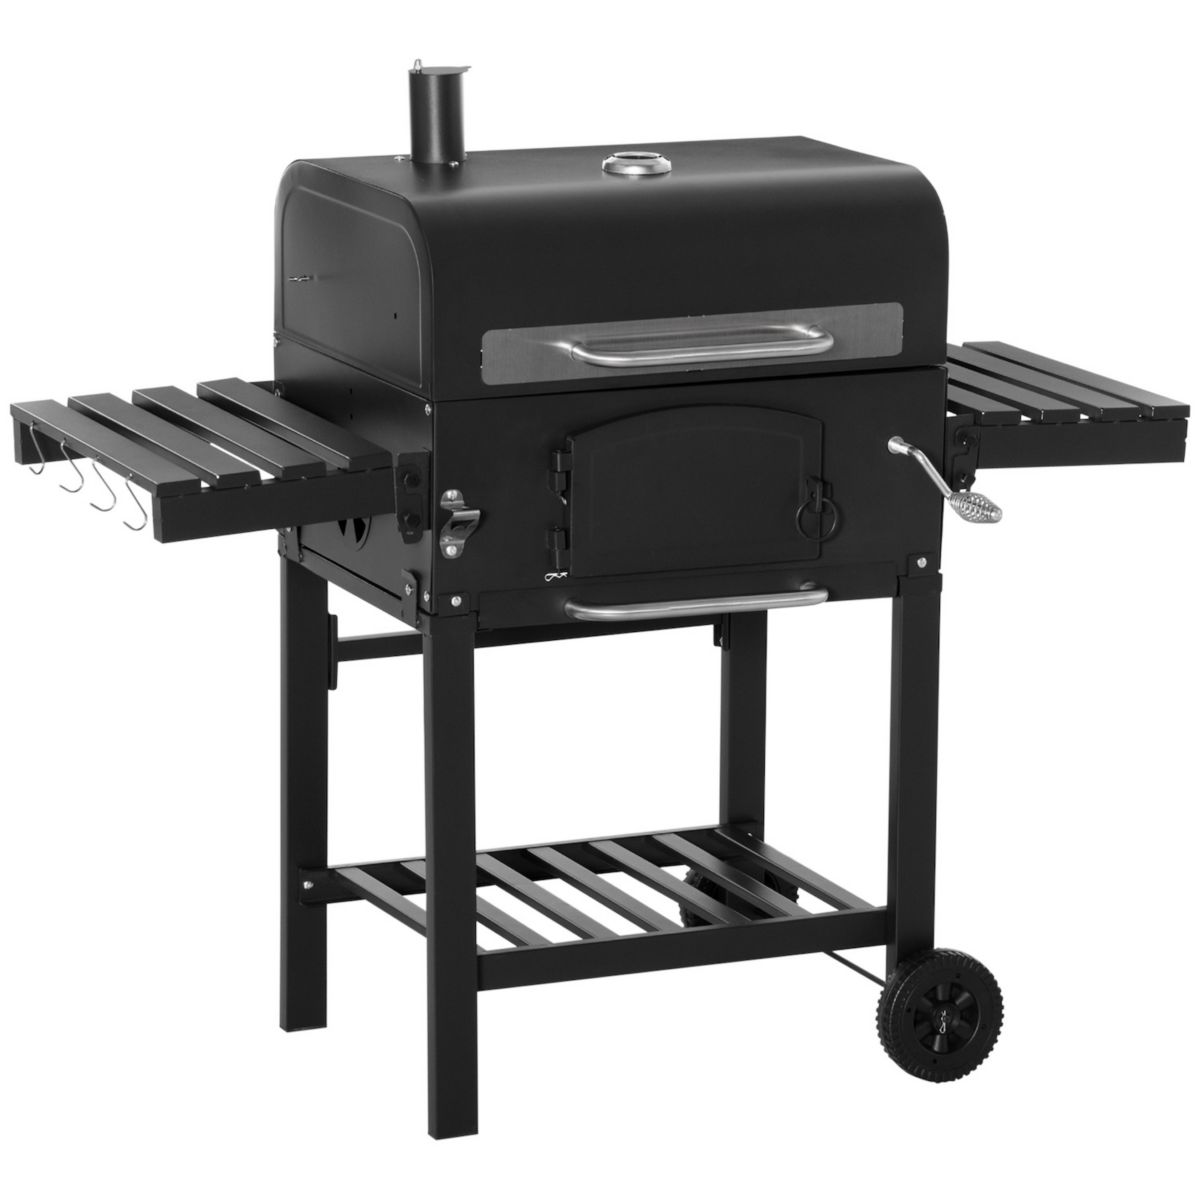 Outsunny Charcoal Grill BBQ with Adjustable Charcoal Height, Portable Barbecue Smoker with Folding Shelves, Thermometer, Bottle Opener, and Wheels for Outdoor Camping, Picnic, Patio and Backyard Outsunny